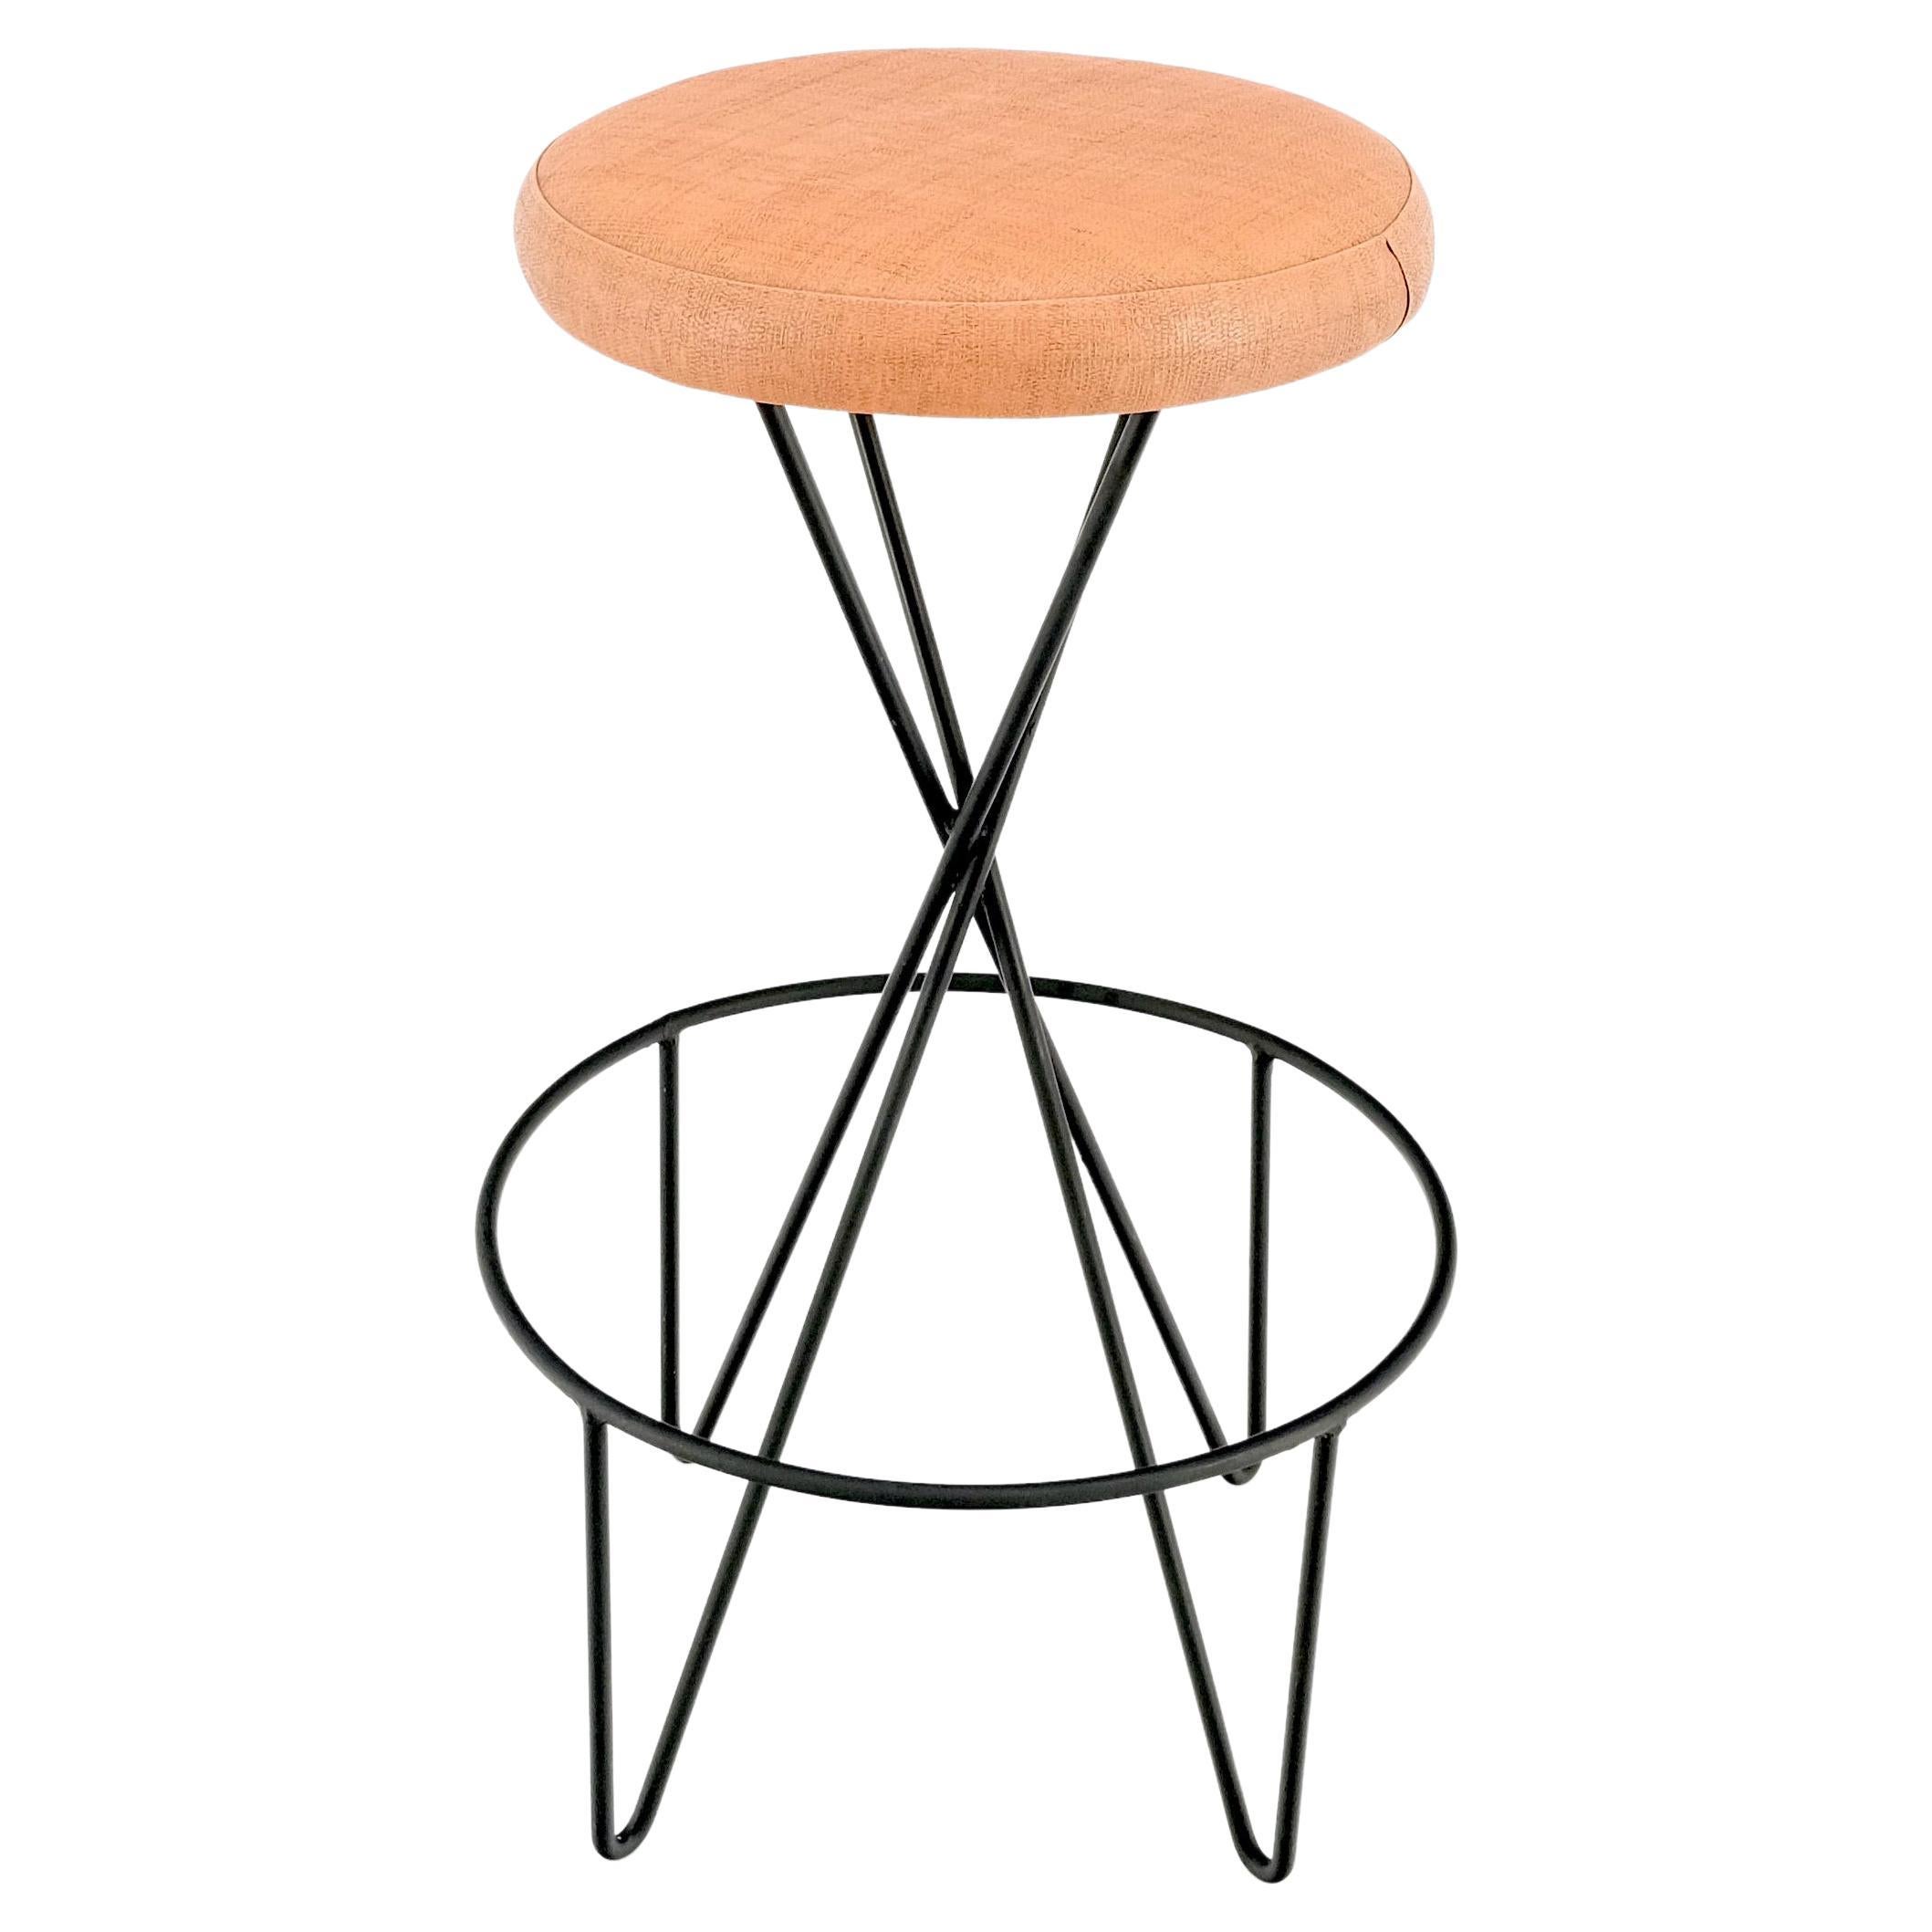 Frederick Weiberg Mid-Century Modern Wire Base Round Seat Bar Stool, circa 1970s For Sale